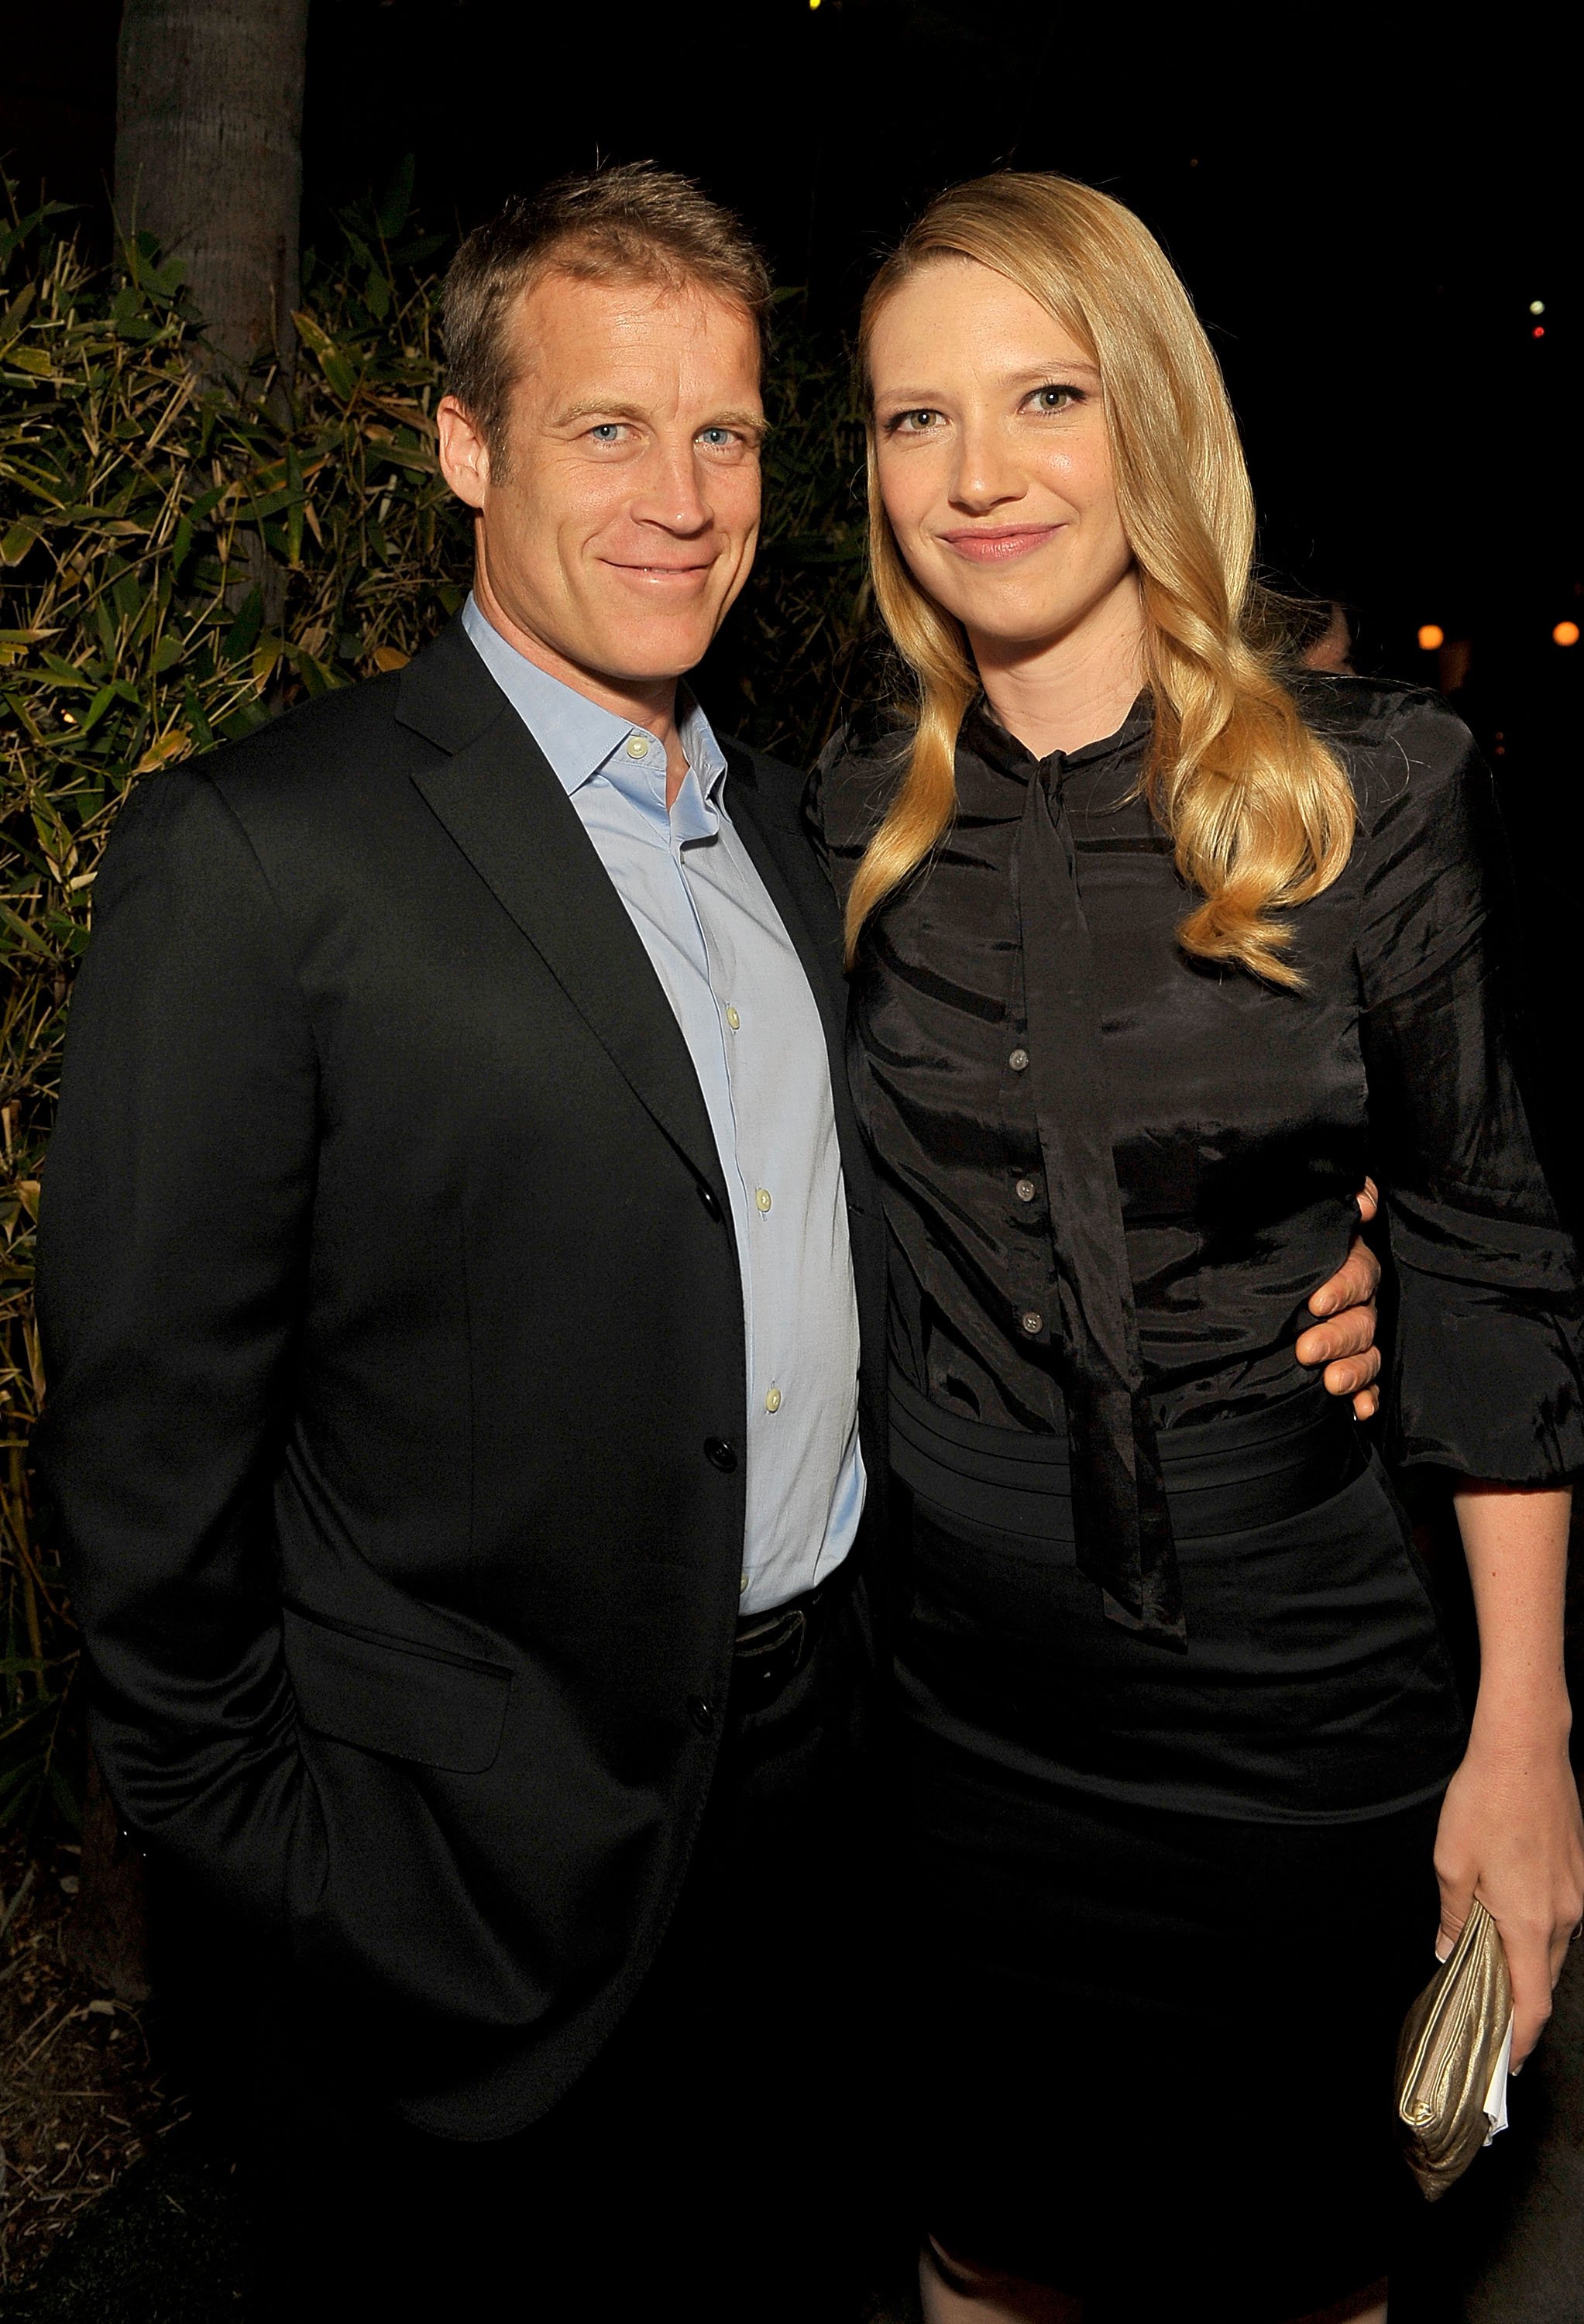  Mark Valley and actress Anna Torv at The Roosevelt Hotel on May 8, 2009, in Hollywood, California. | Source: Getty Images